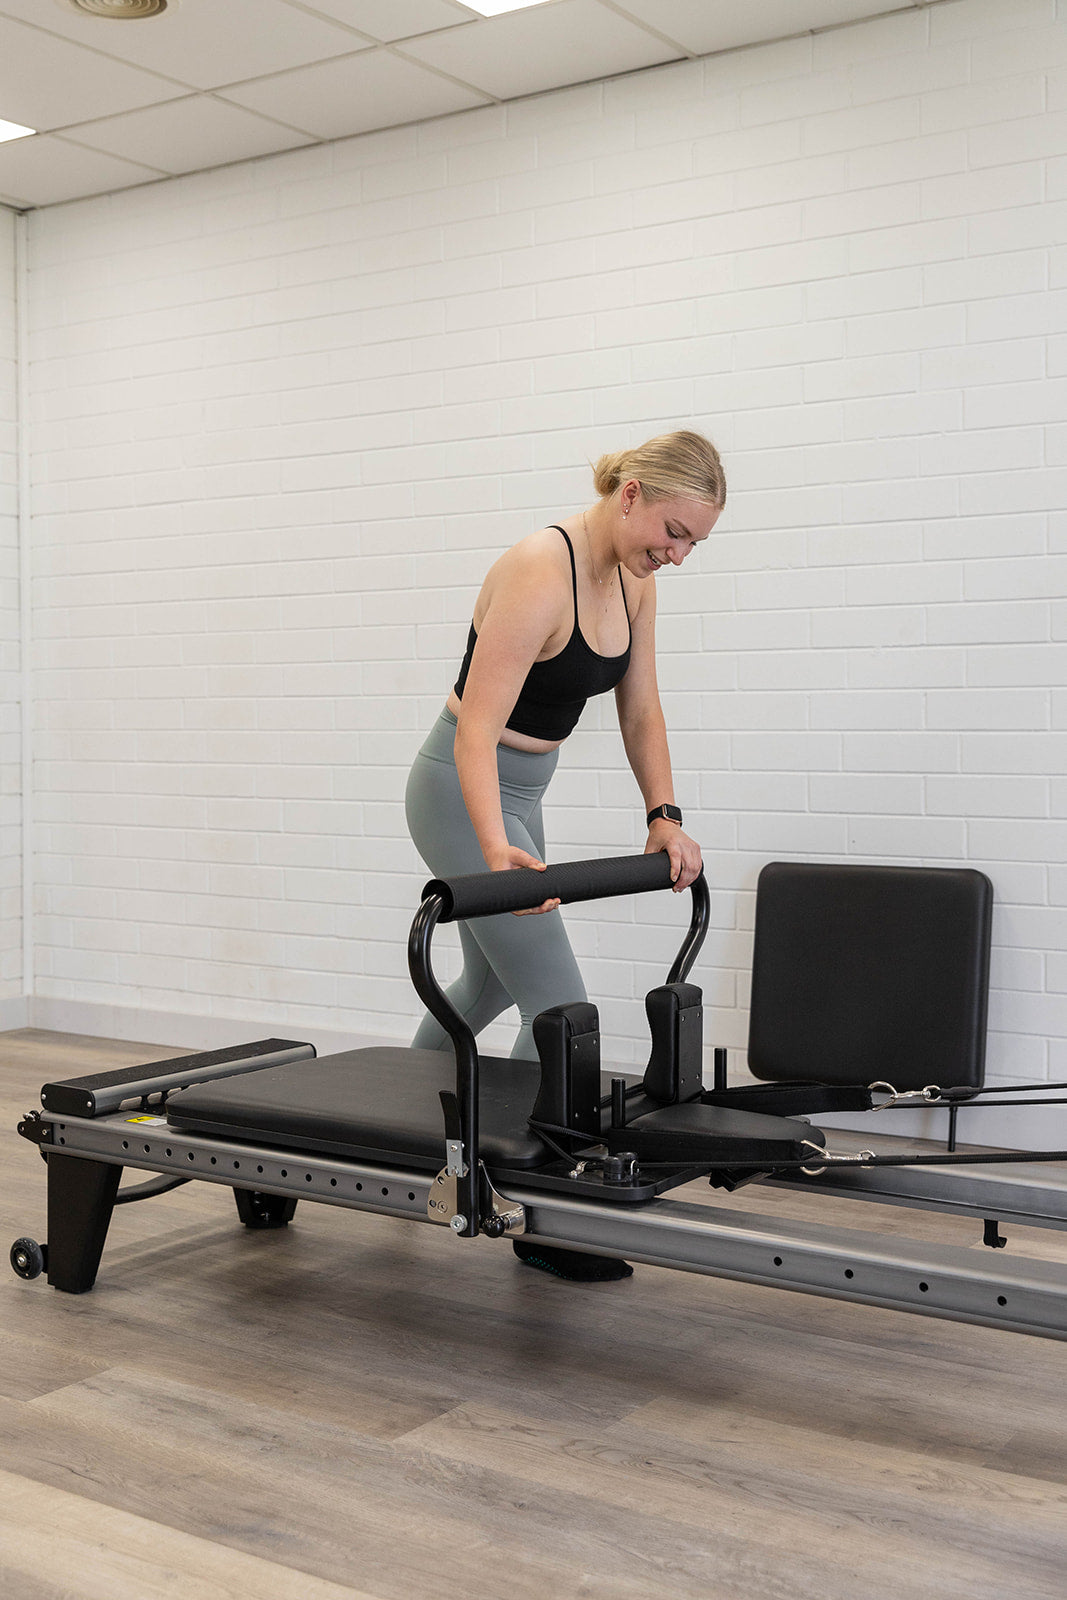 Does Reformer Pilates Work for Weight Loss? – LOPE Pilates Equipment